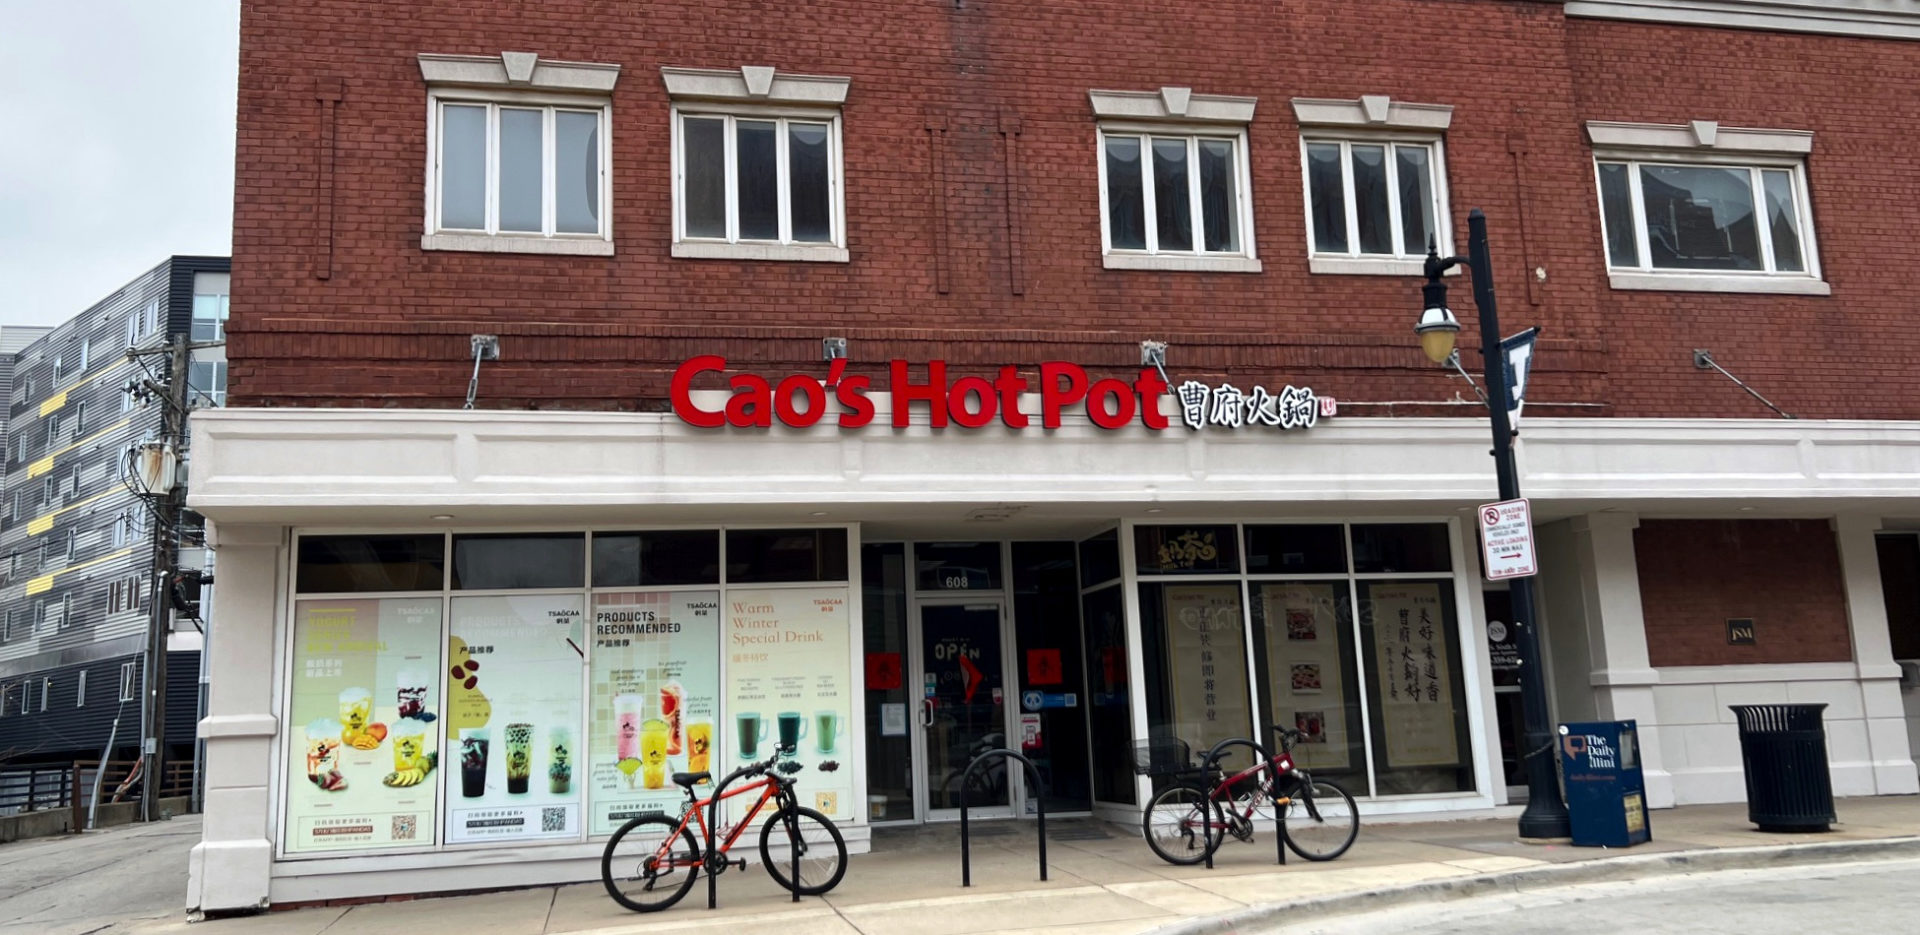 Cao's Hot Pot has a new location on Sixth Street. Red letters with the restaurant's name are affixed to a white covering above the restaurant. Two bikes are parked in front. Photo by Alyssa Buckley.